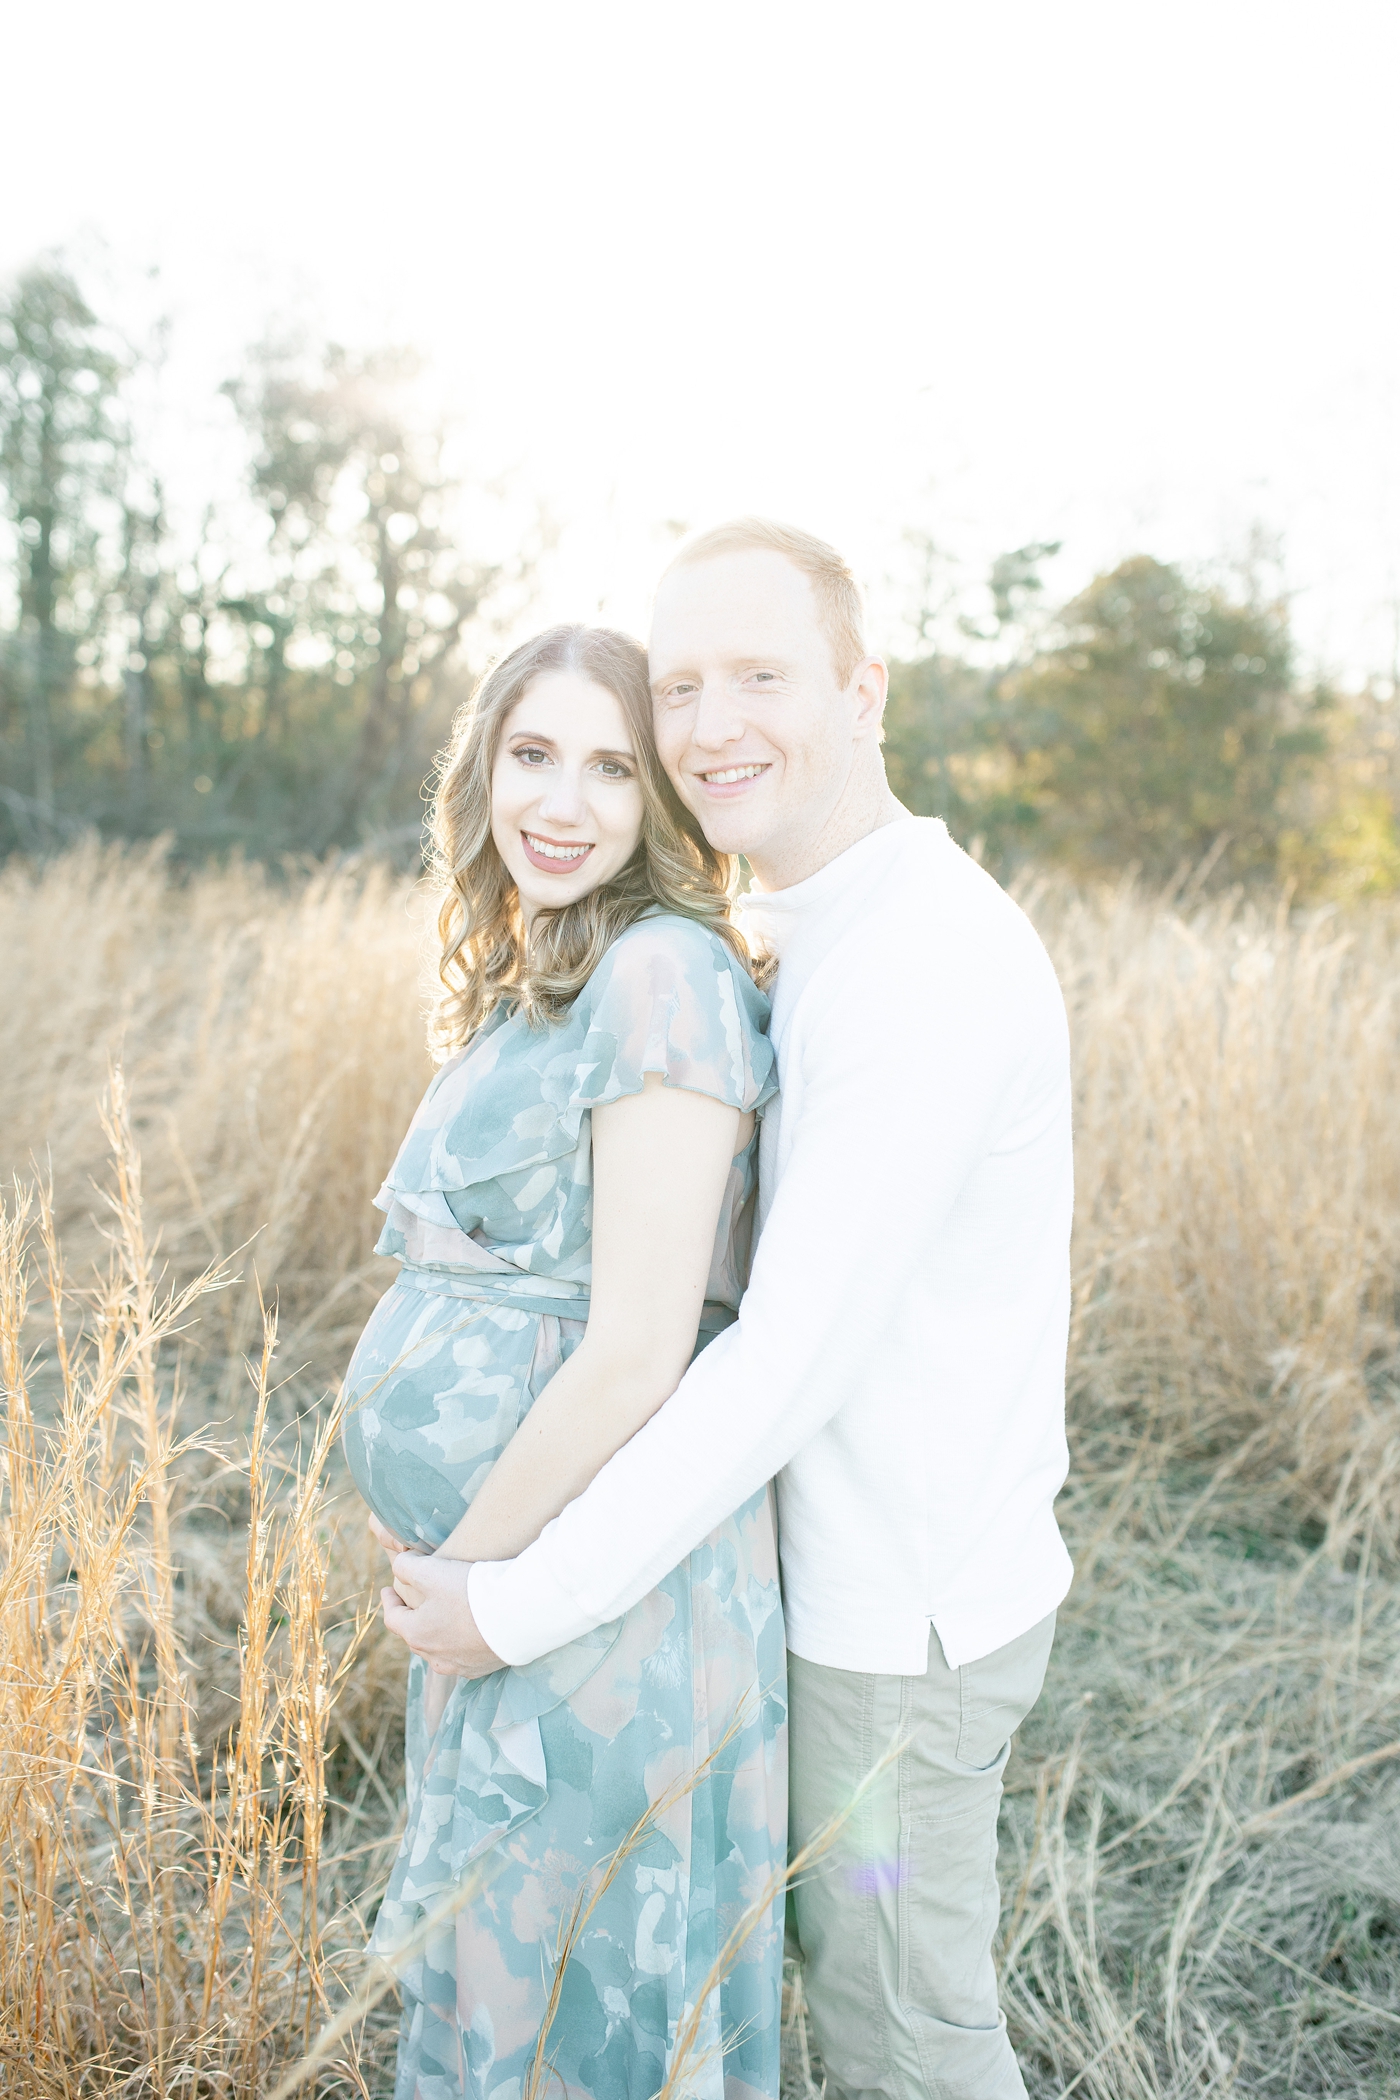 Mom and Dad to be celebrate baby boy with maternity photoshoot with Little Sunshine Photography.